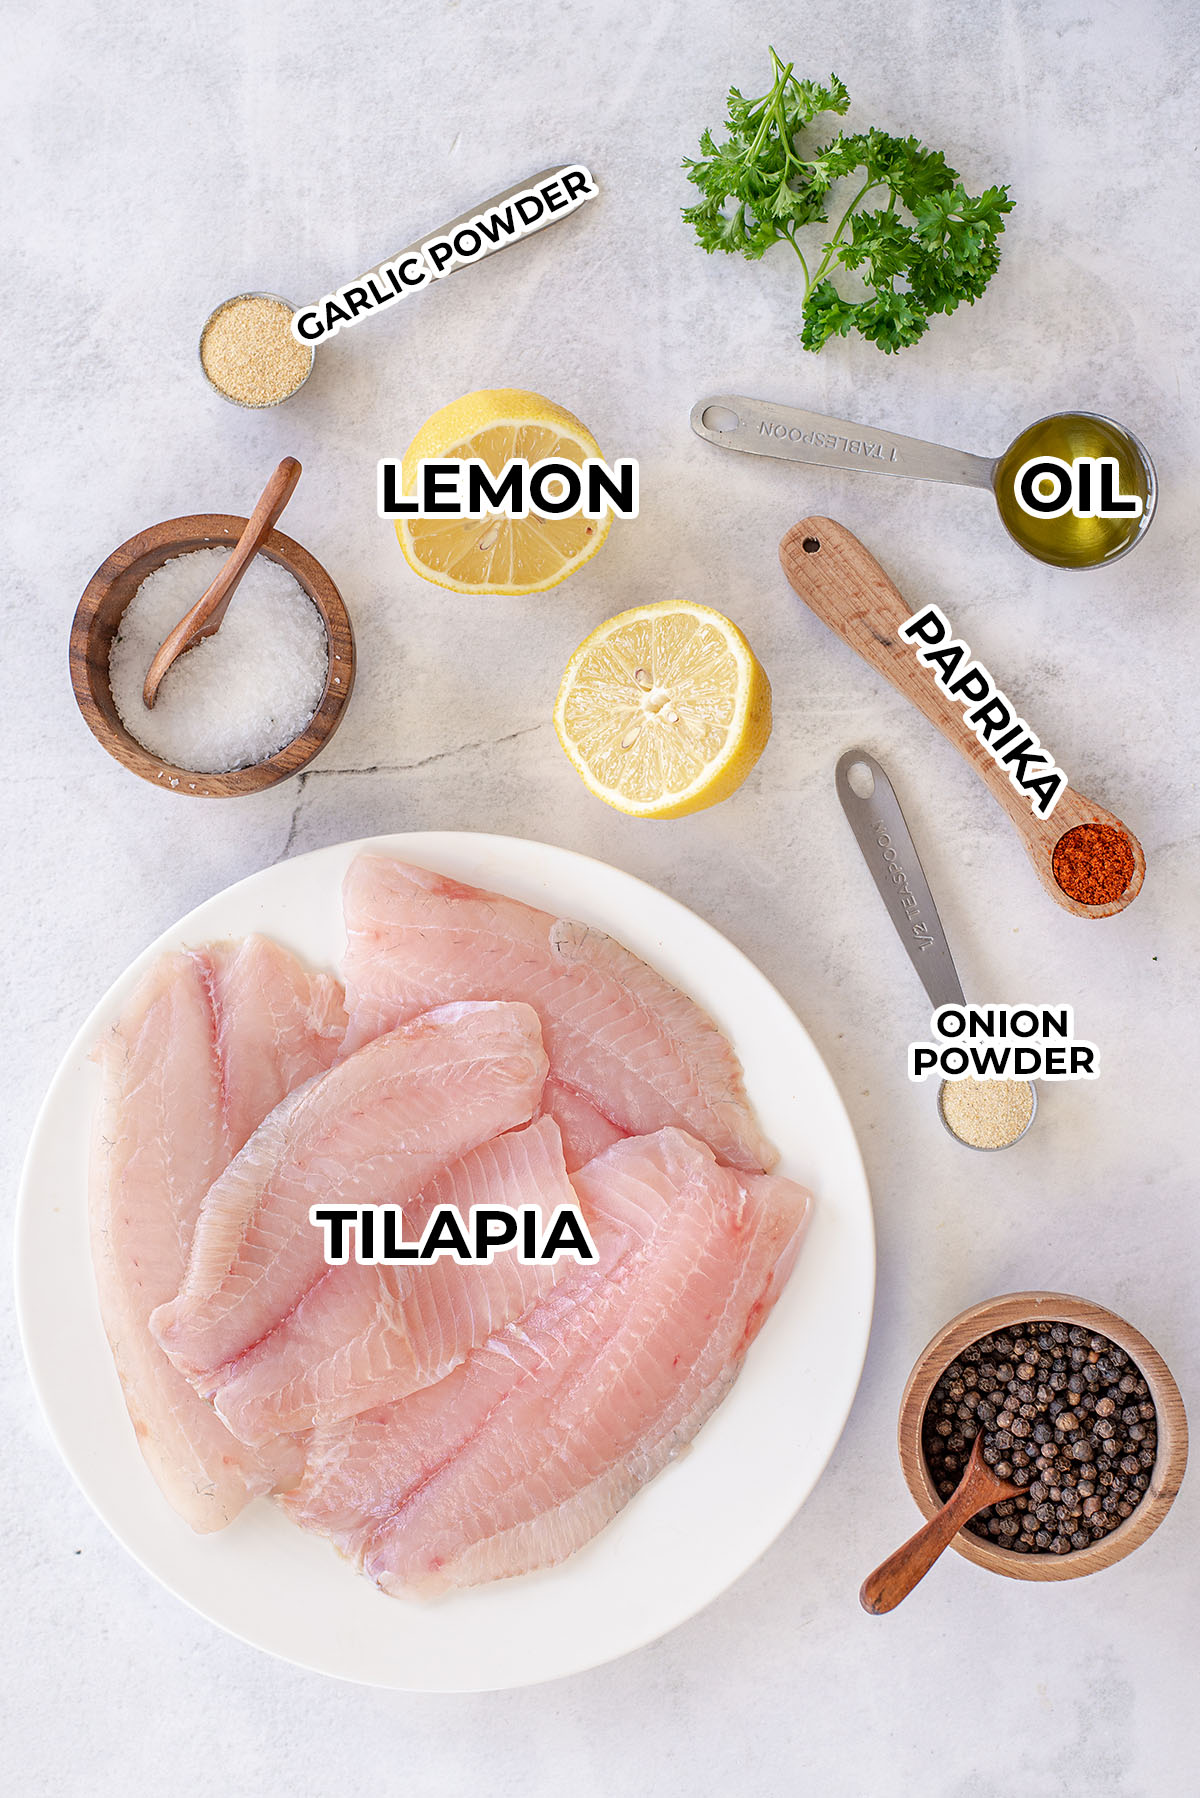 Tilapia ingredients spread out on a countertop.